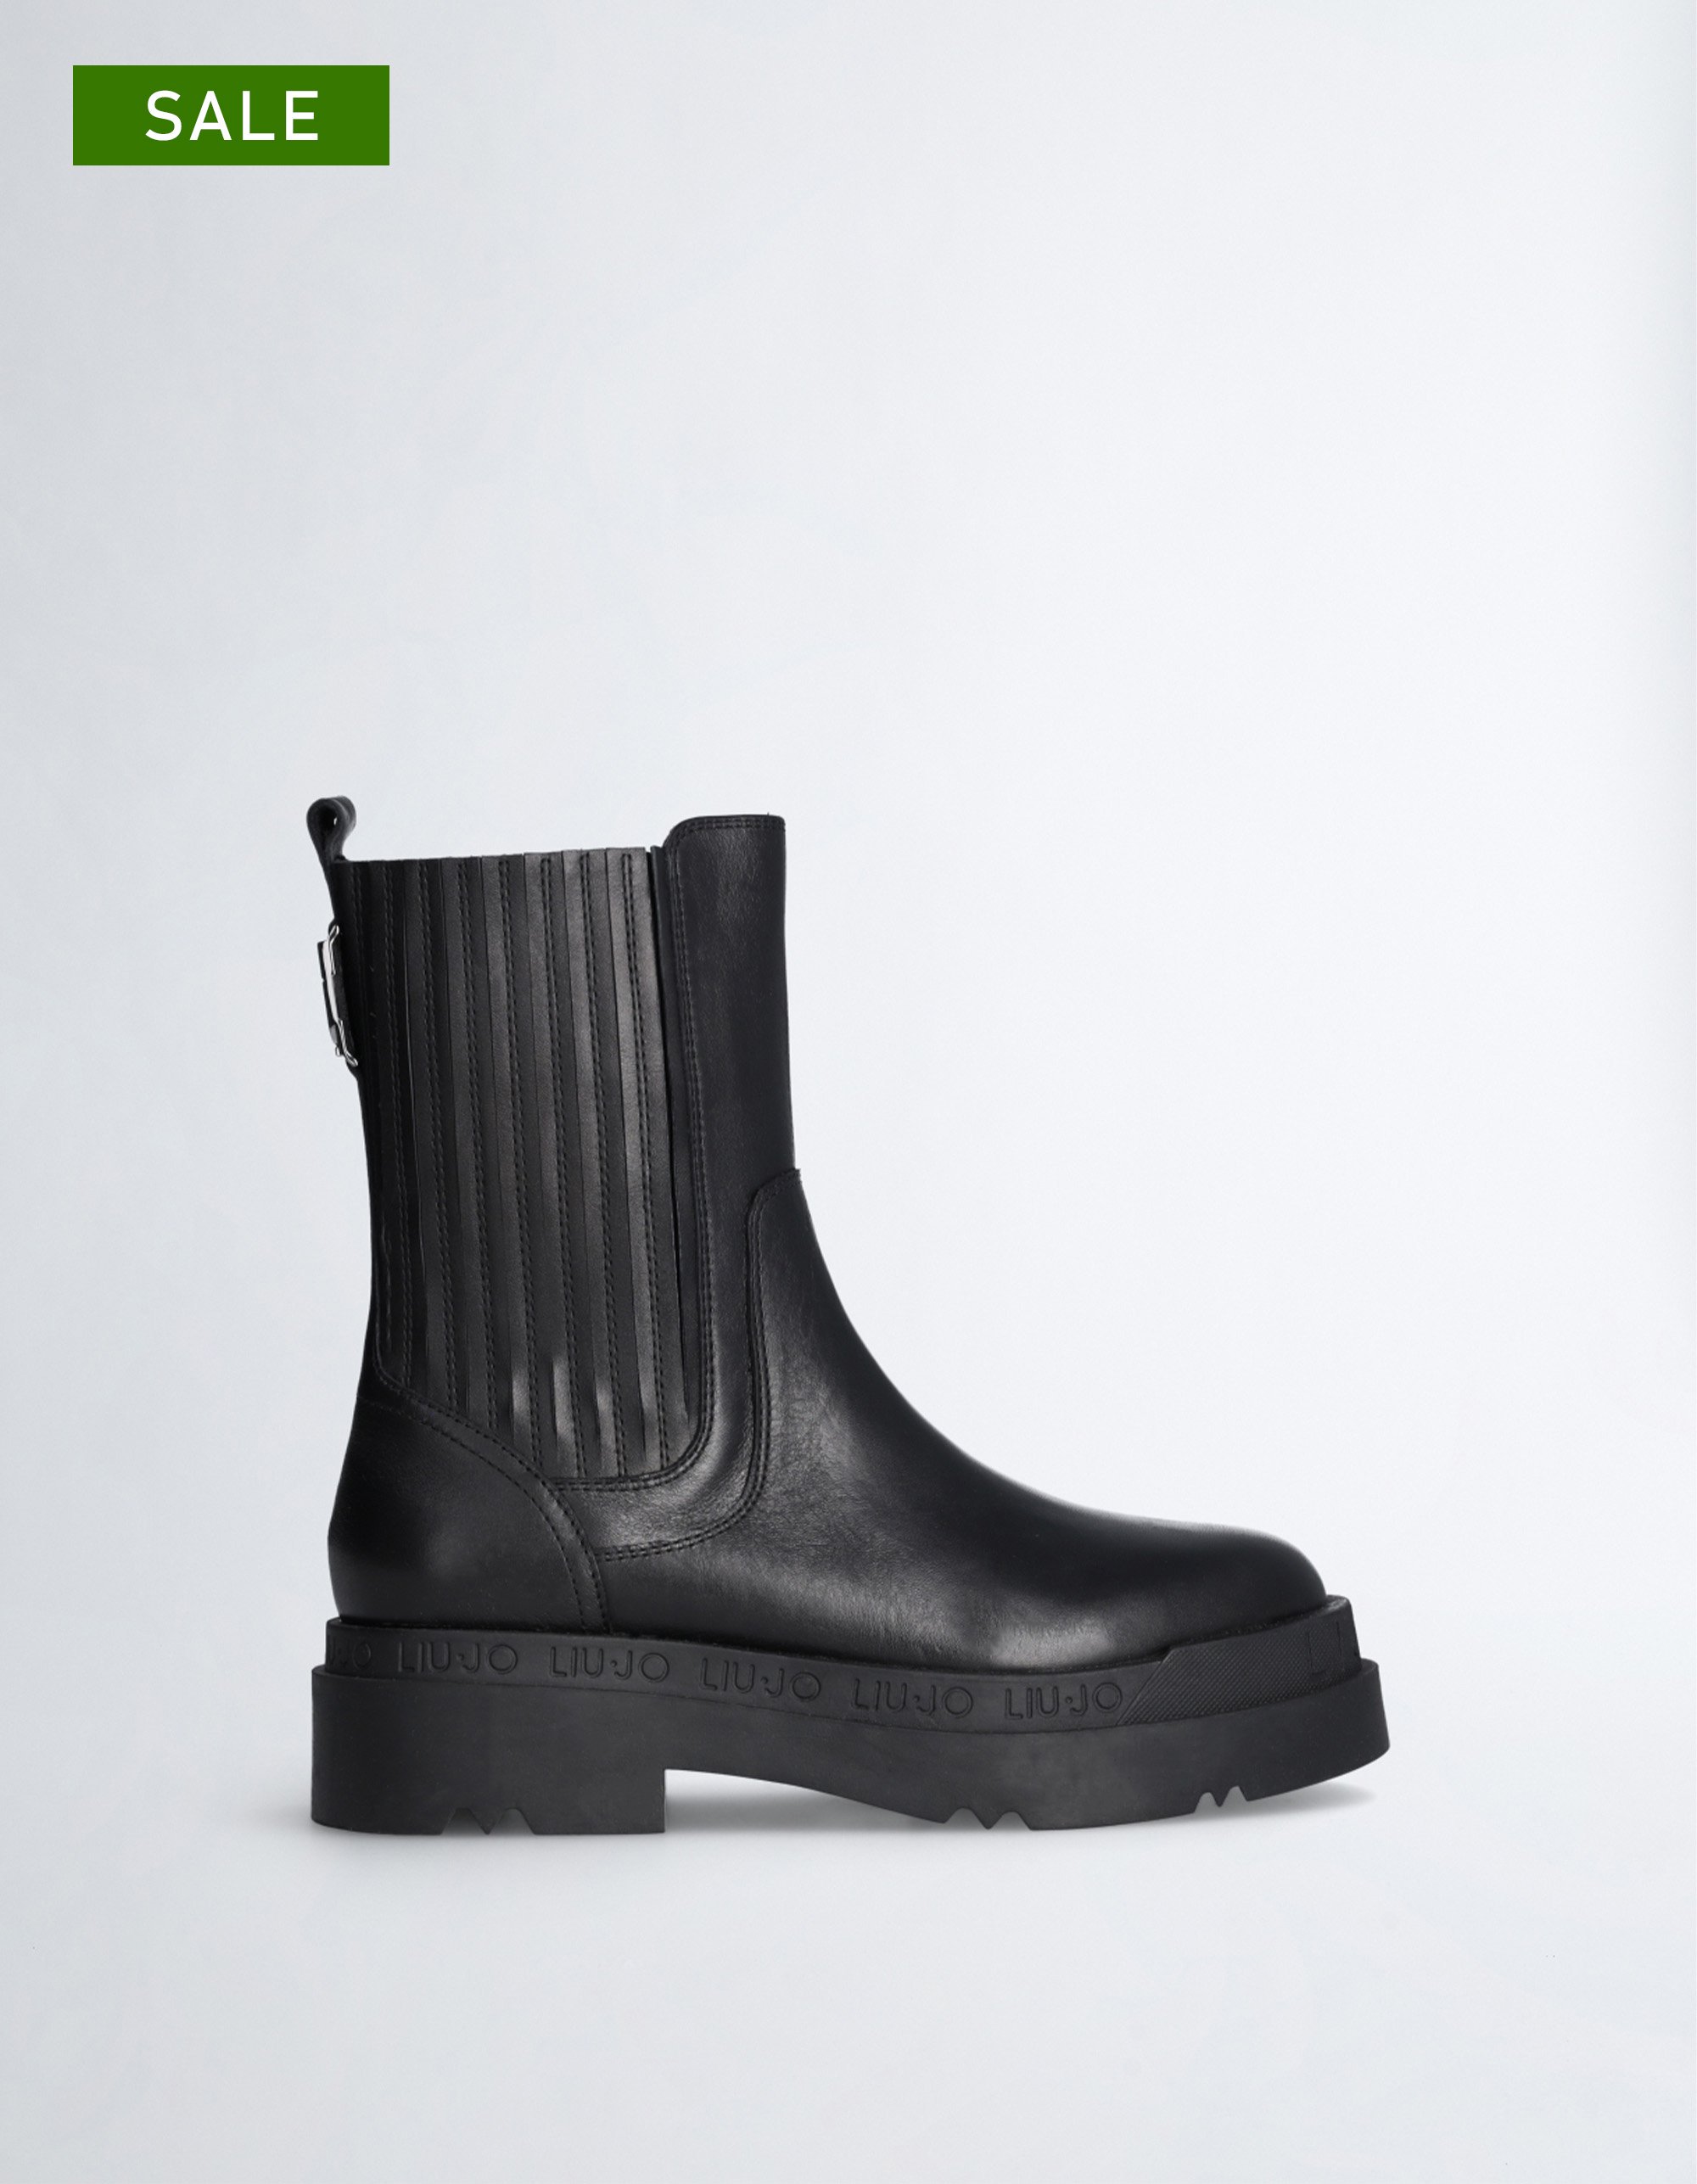 LIUJOLeather beatles ankle boots